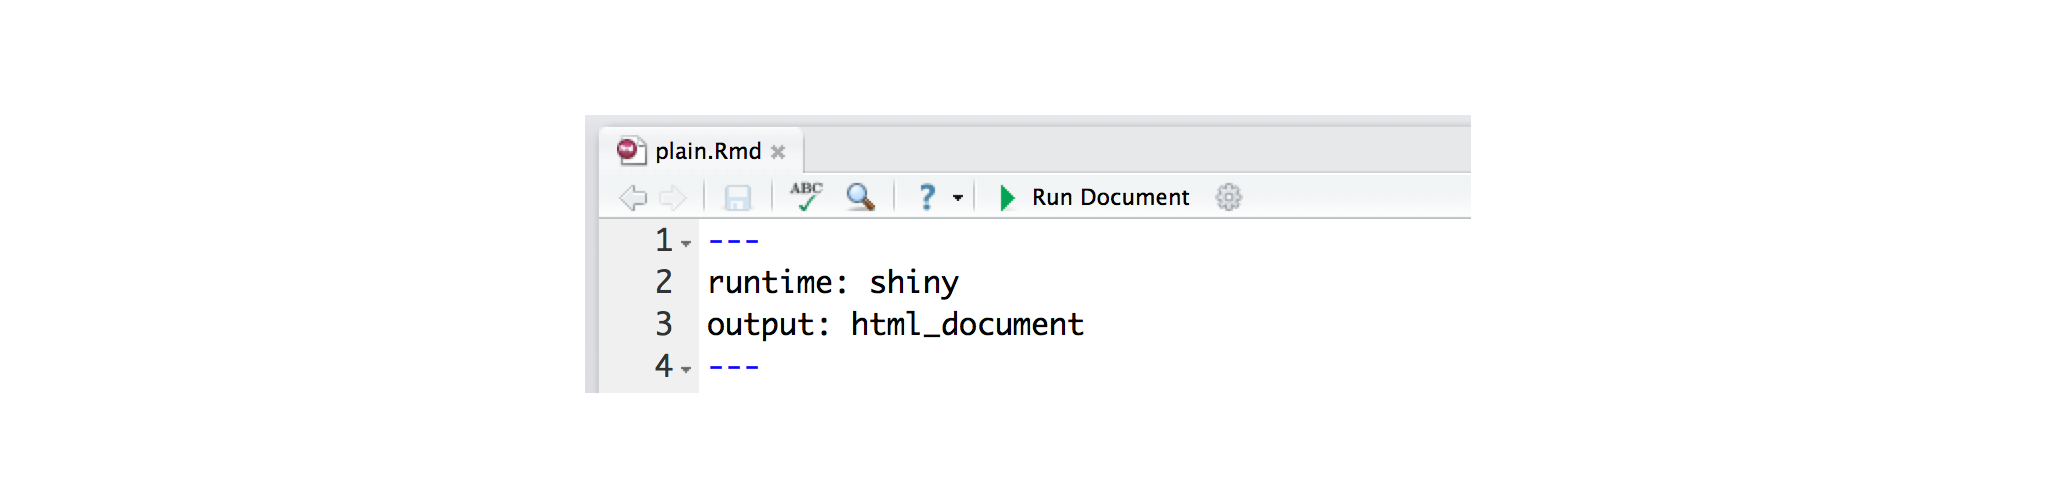 YAML header that says runtime: shiny, output: html_document